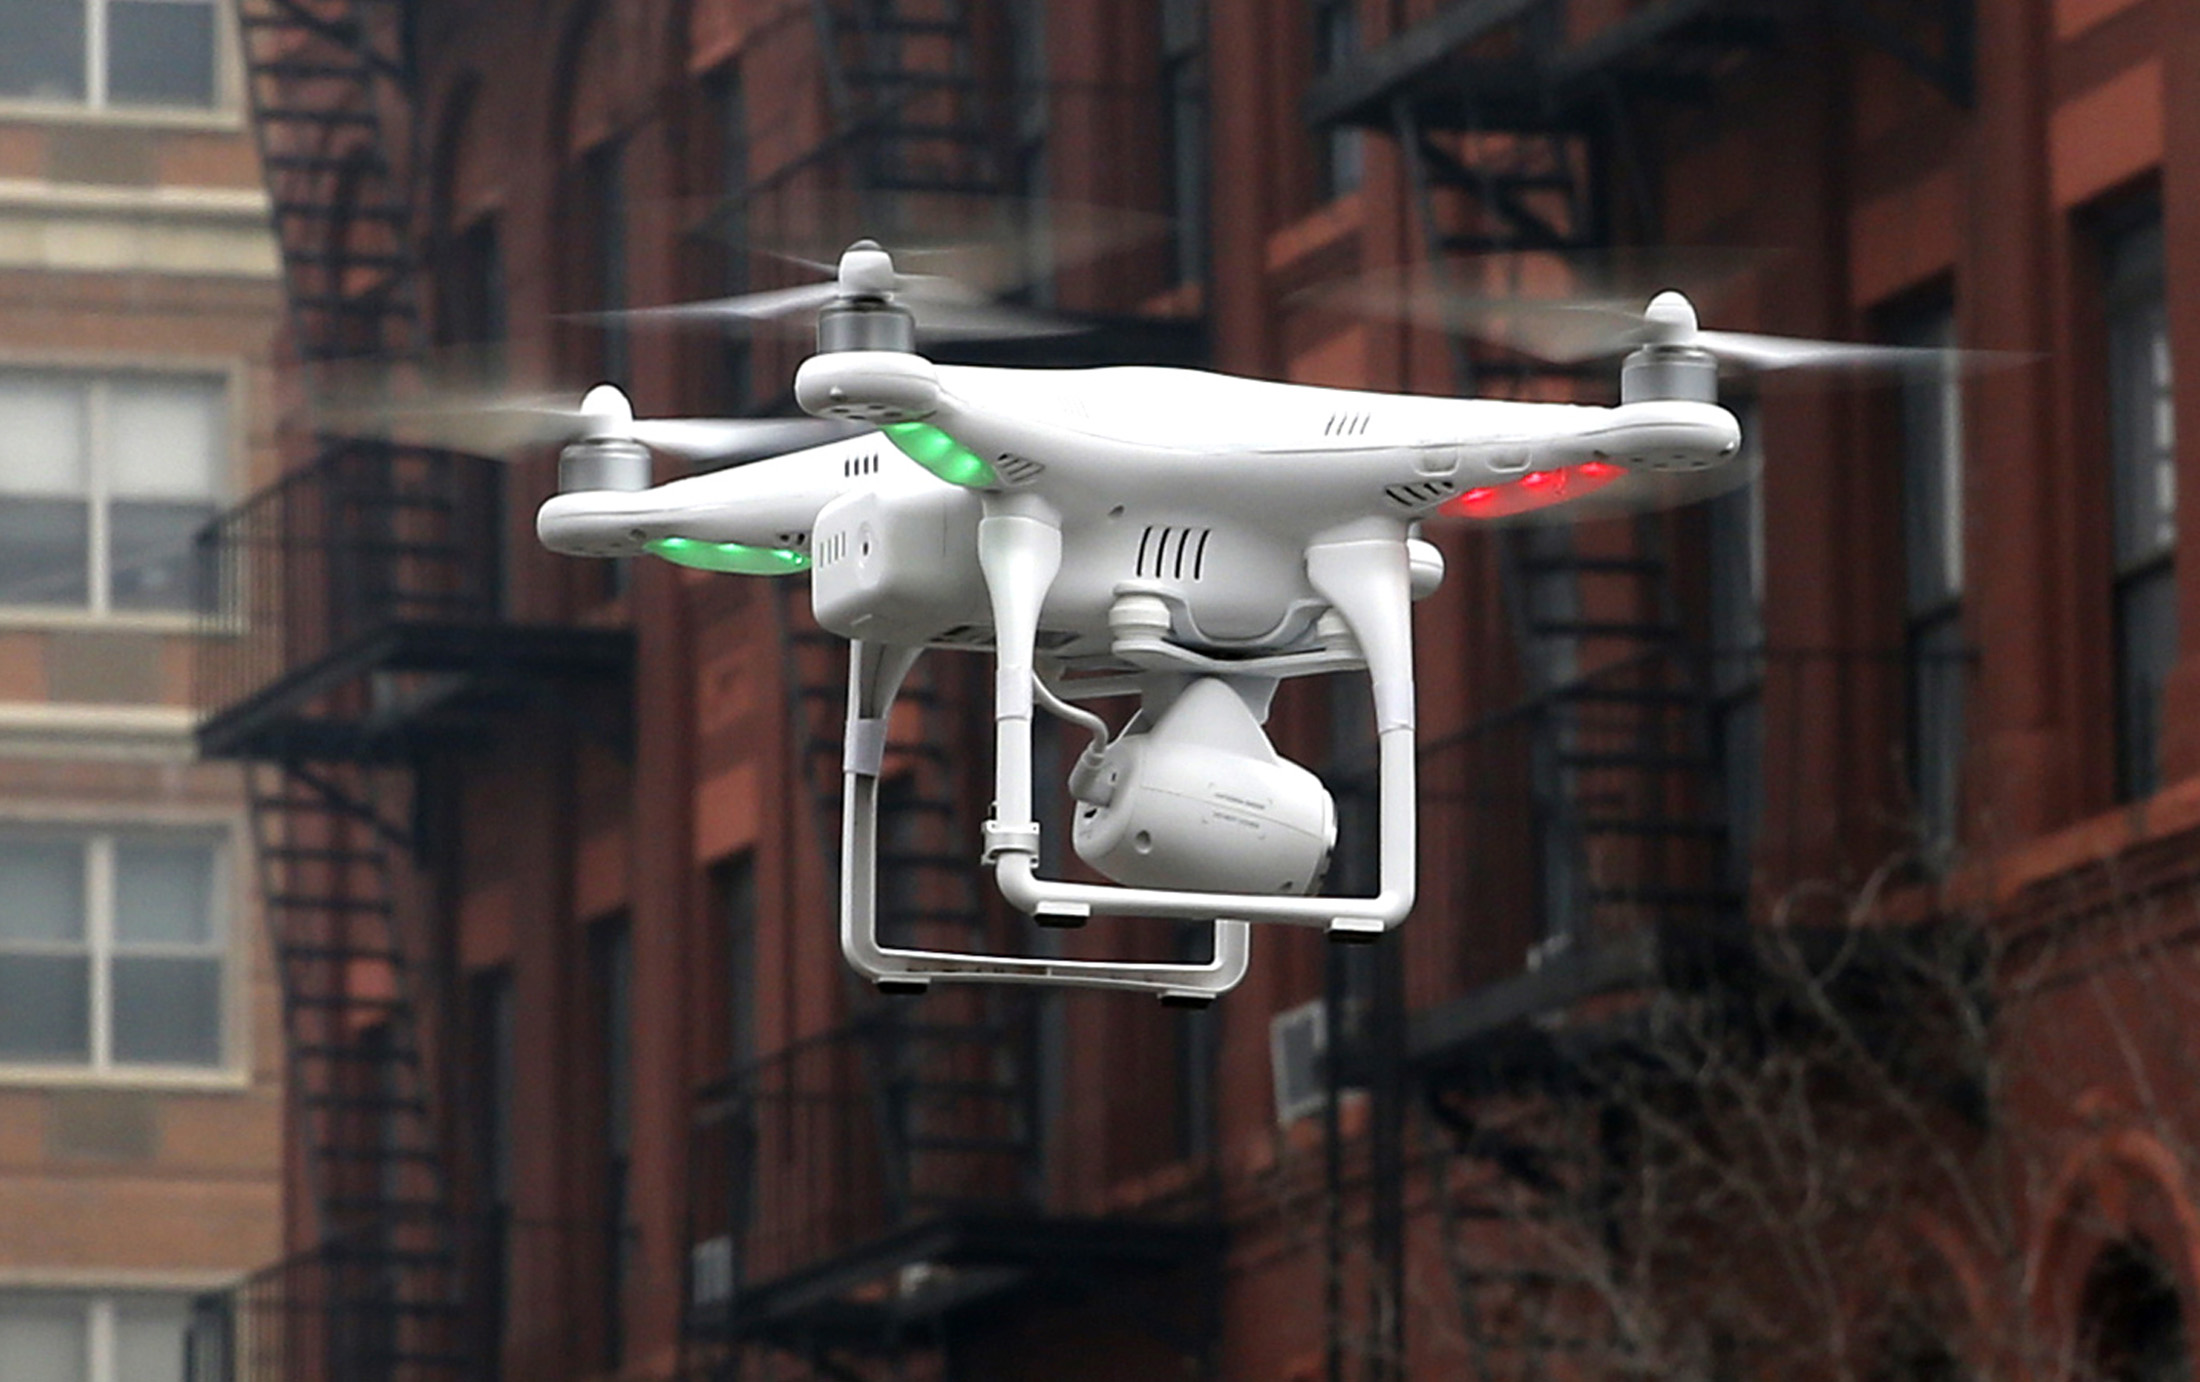 A camera drone operated by a civilian in New York City